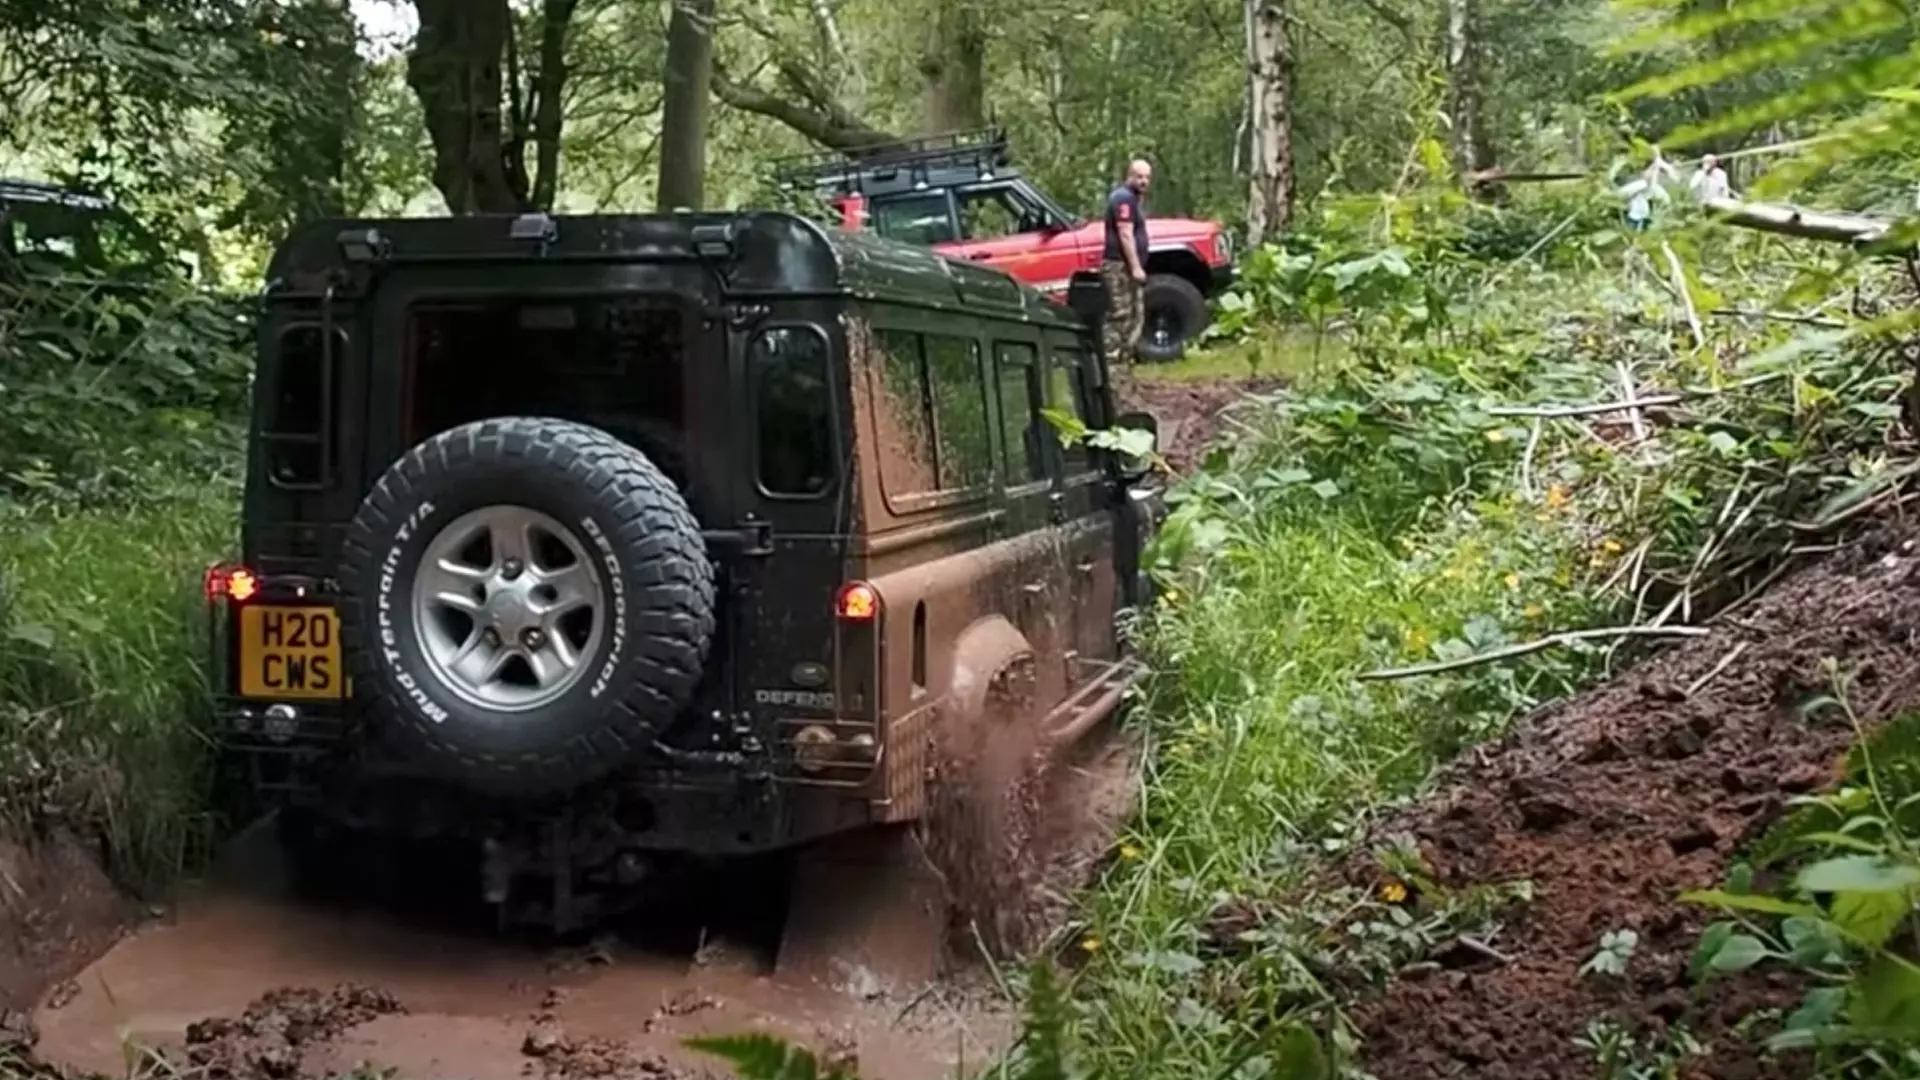 This Double-Winch Rescue Was an Amazing Moment in Off-Road Recovery